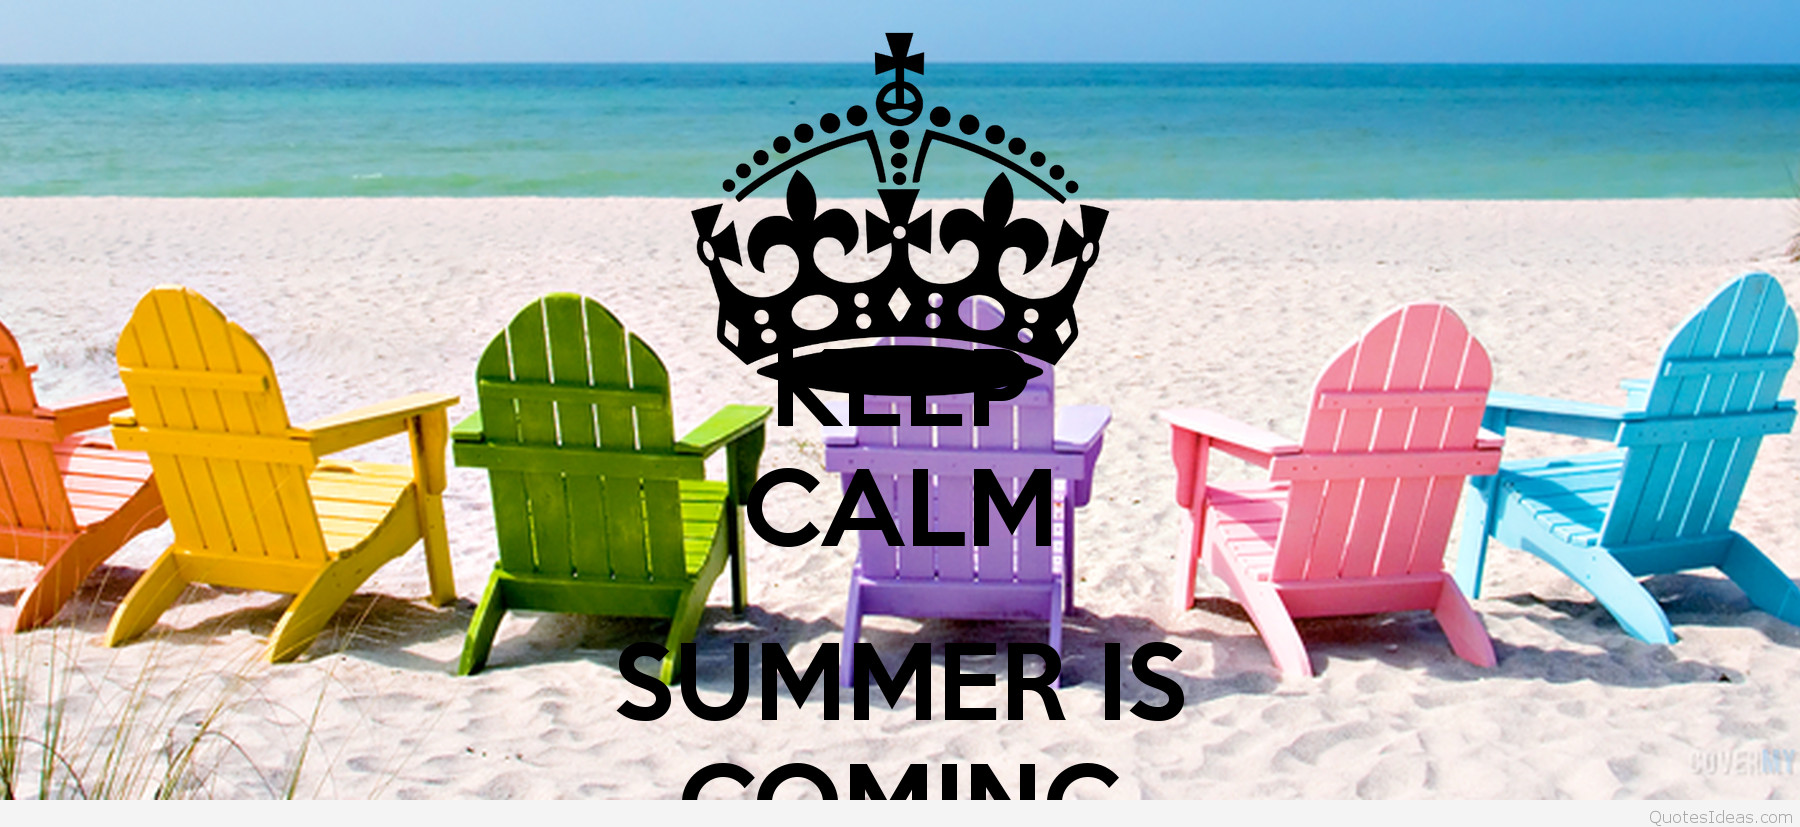 Summer Is Coming Quotes
 Keep calm summer is ing quote with picture